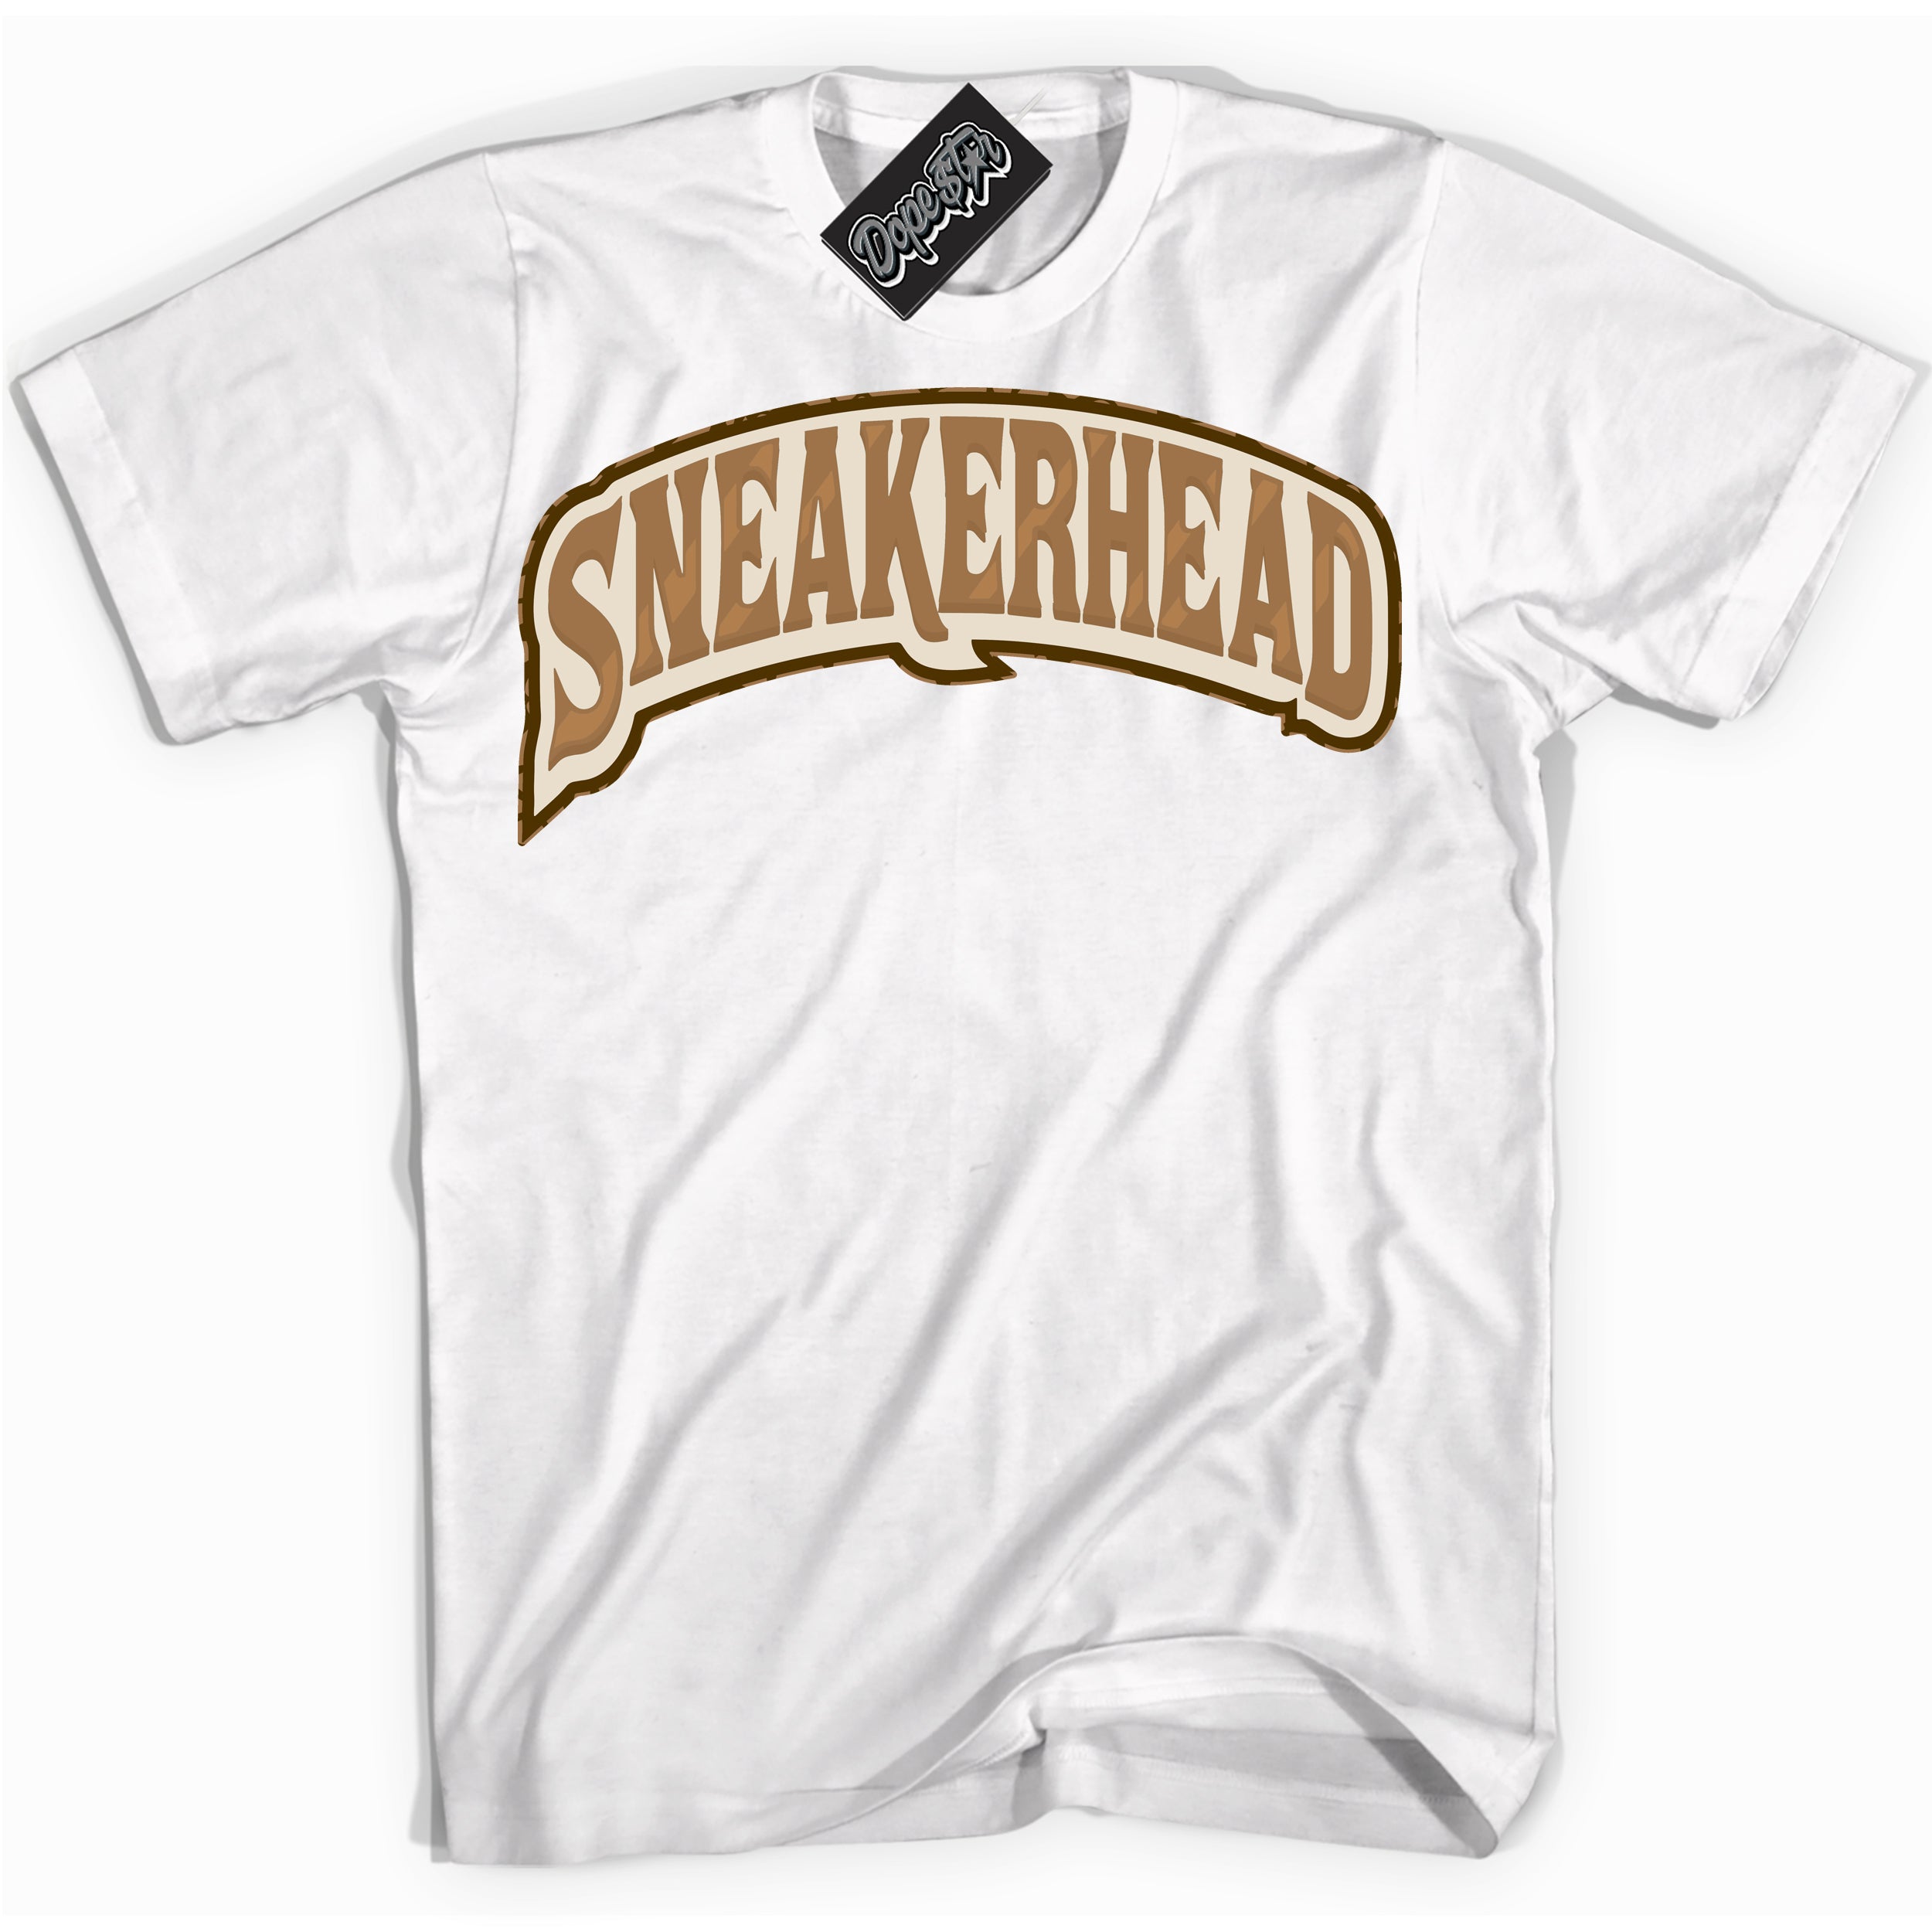 Cool White graphic tee with “ Sneakerhead ” design, that perfectly matches Palomino 3s sneakers 